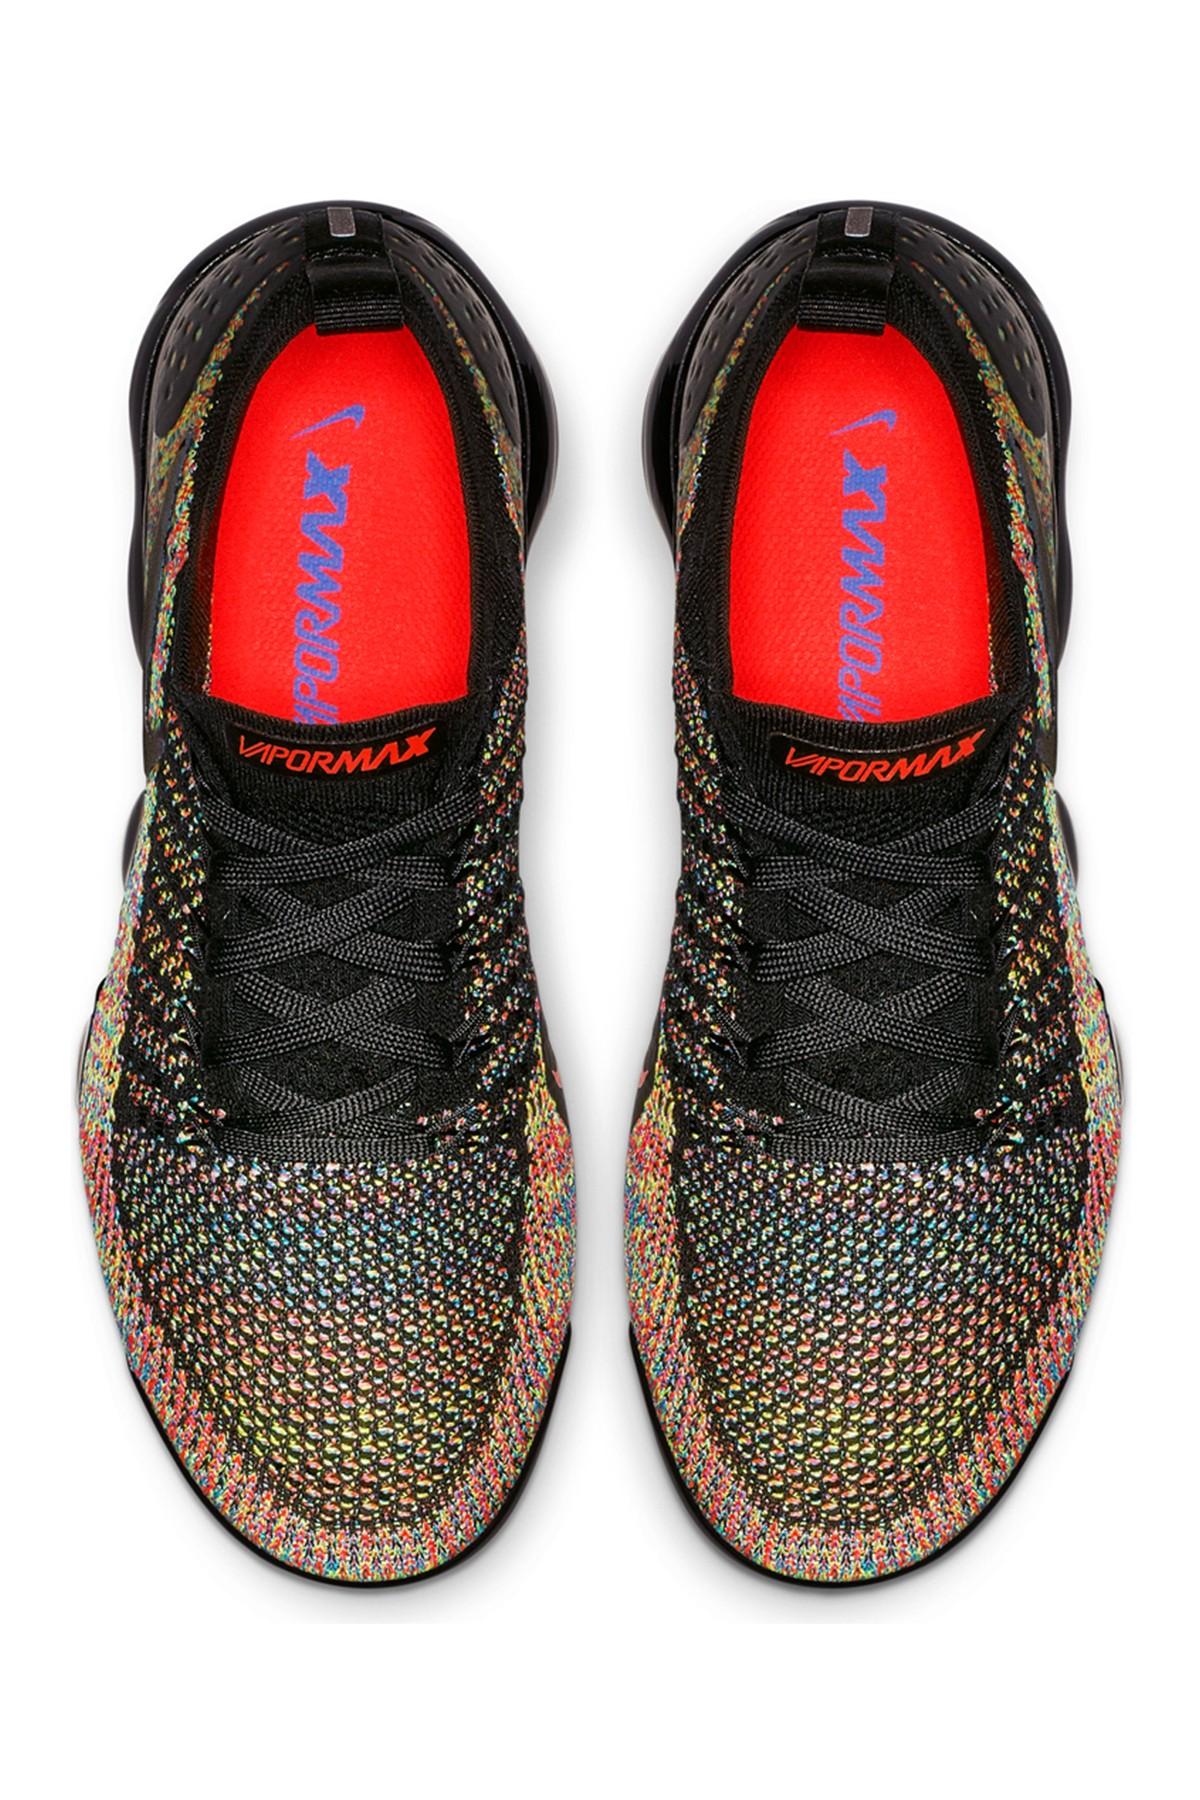 Nike Air Vapormax Flyknit Multi-color | Lyst